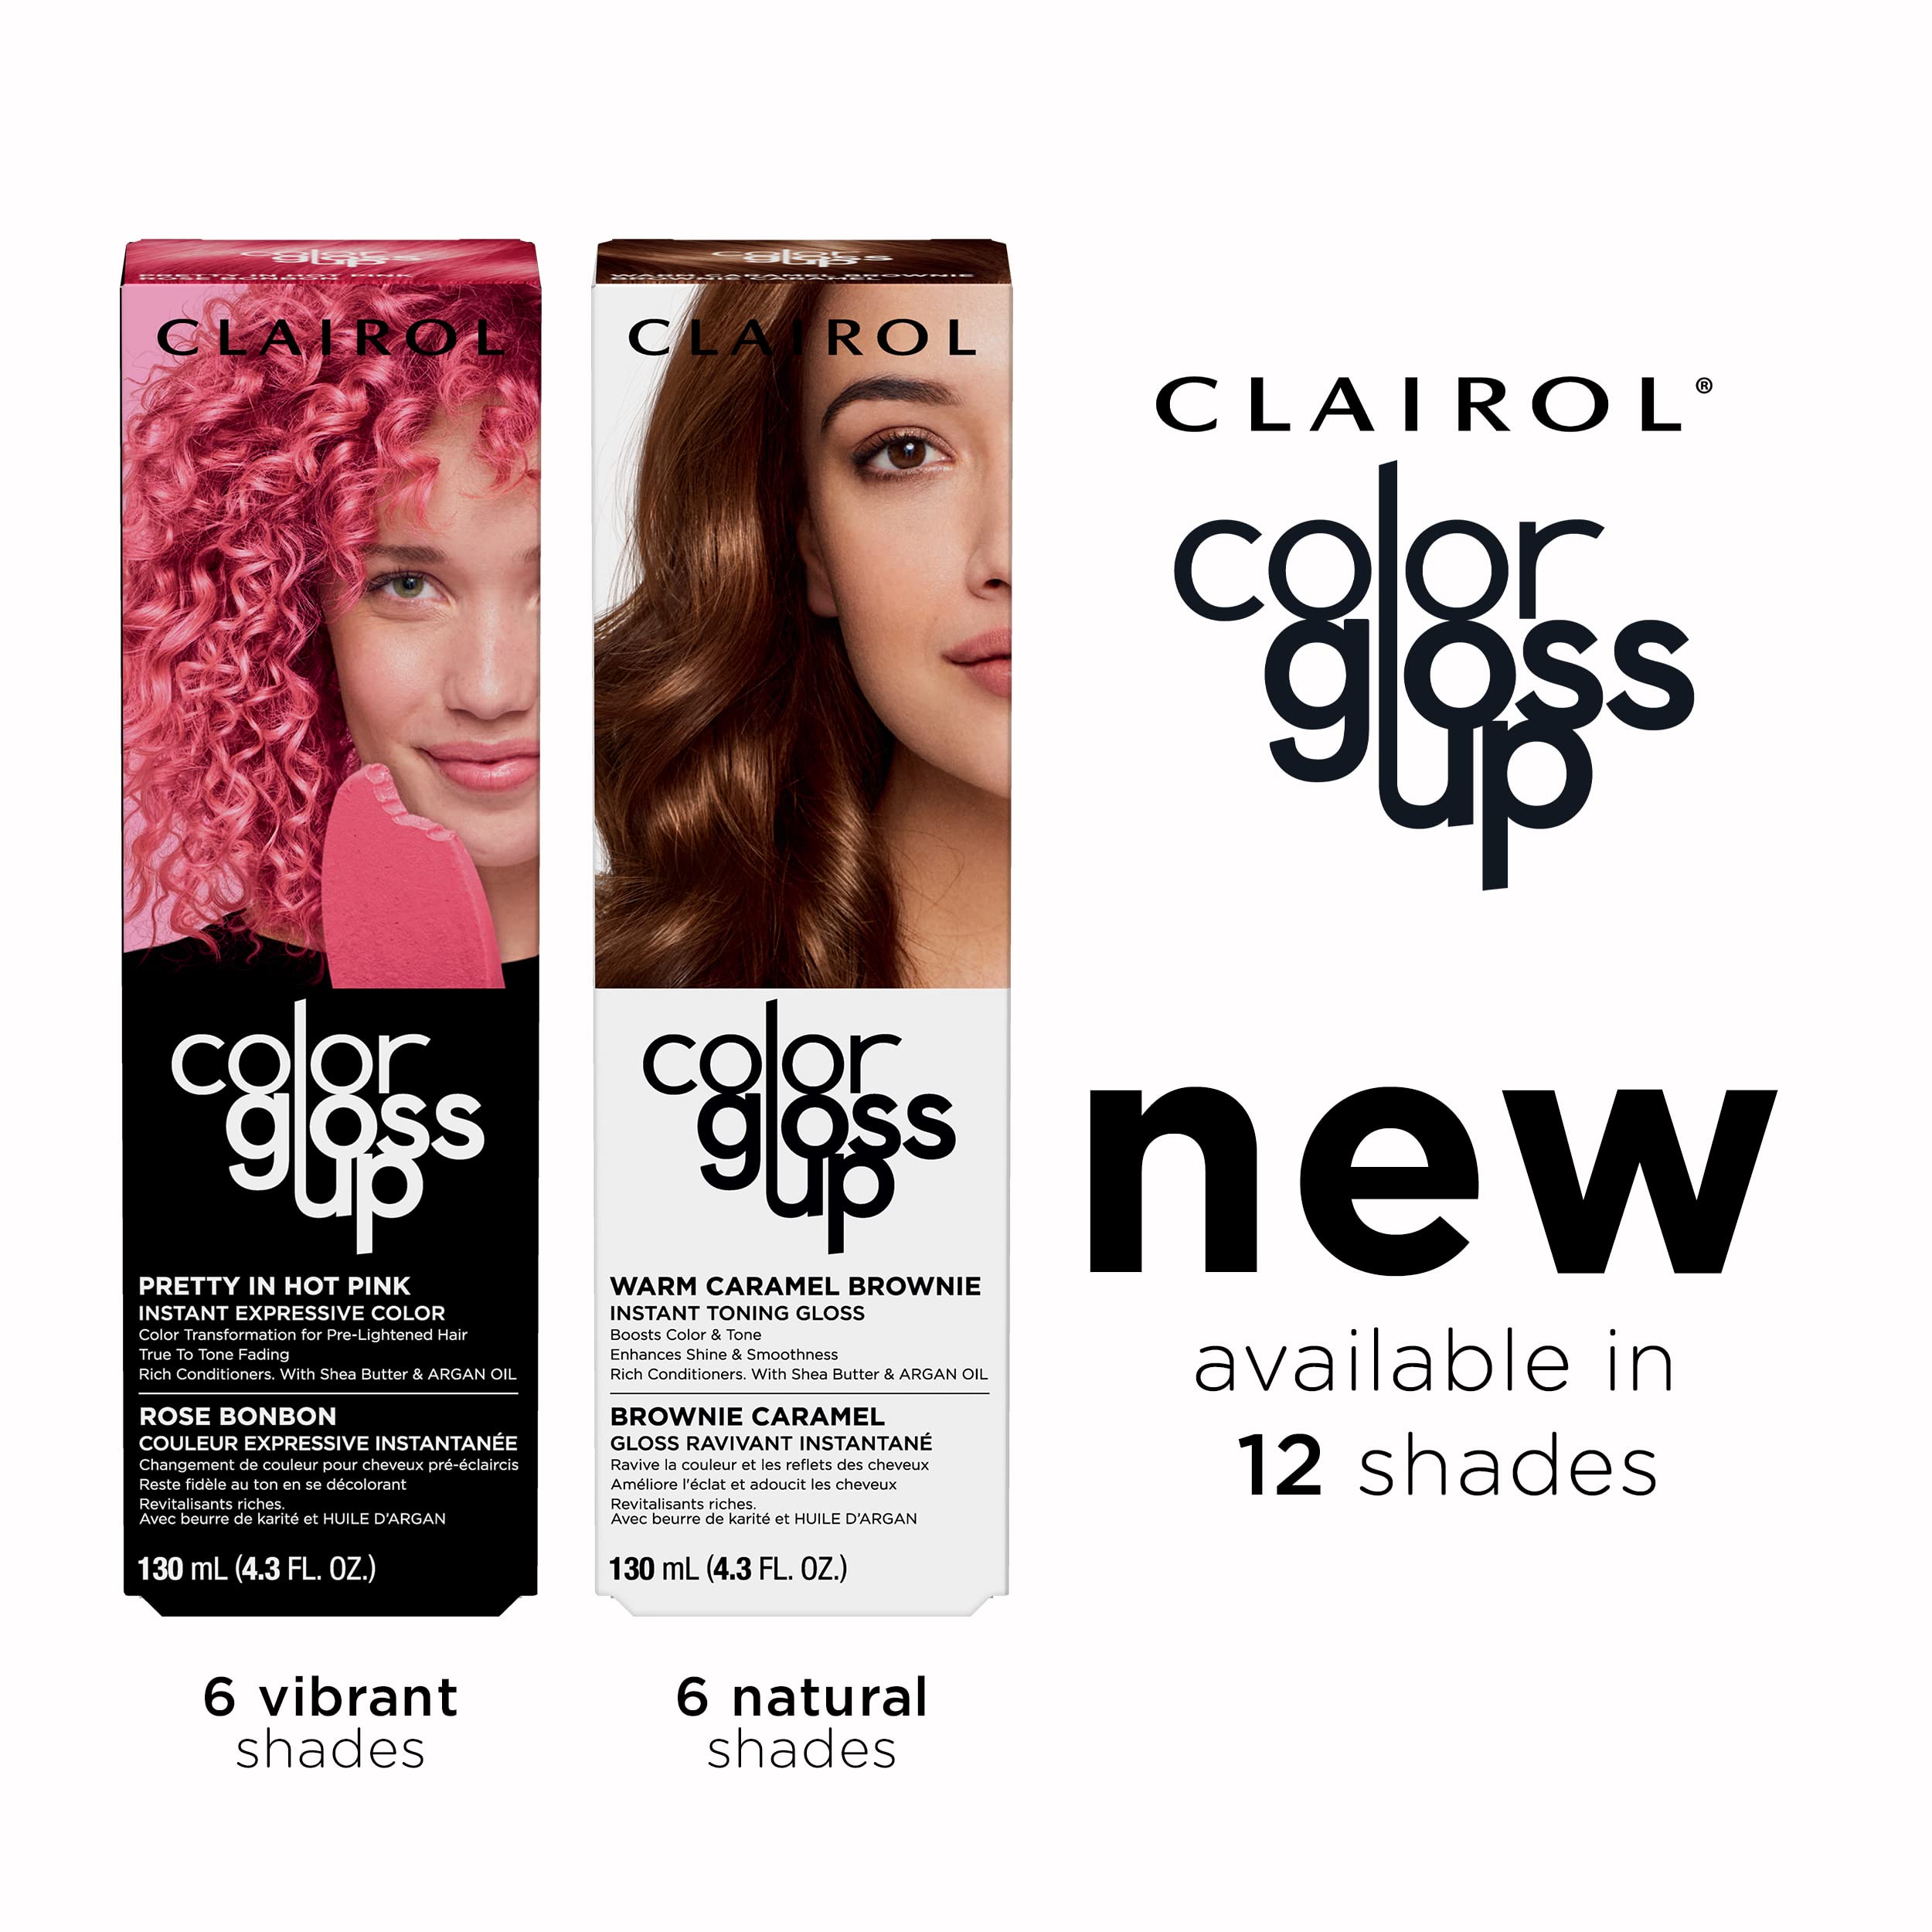 Clairol Color Gloss Up Temporary Hair Dye, Out of the Blue Hair Color, Pack of 1